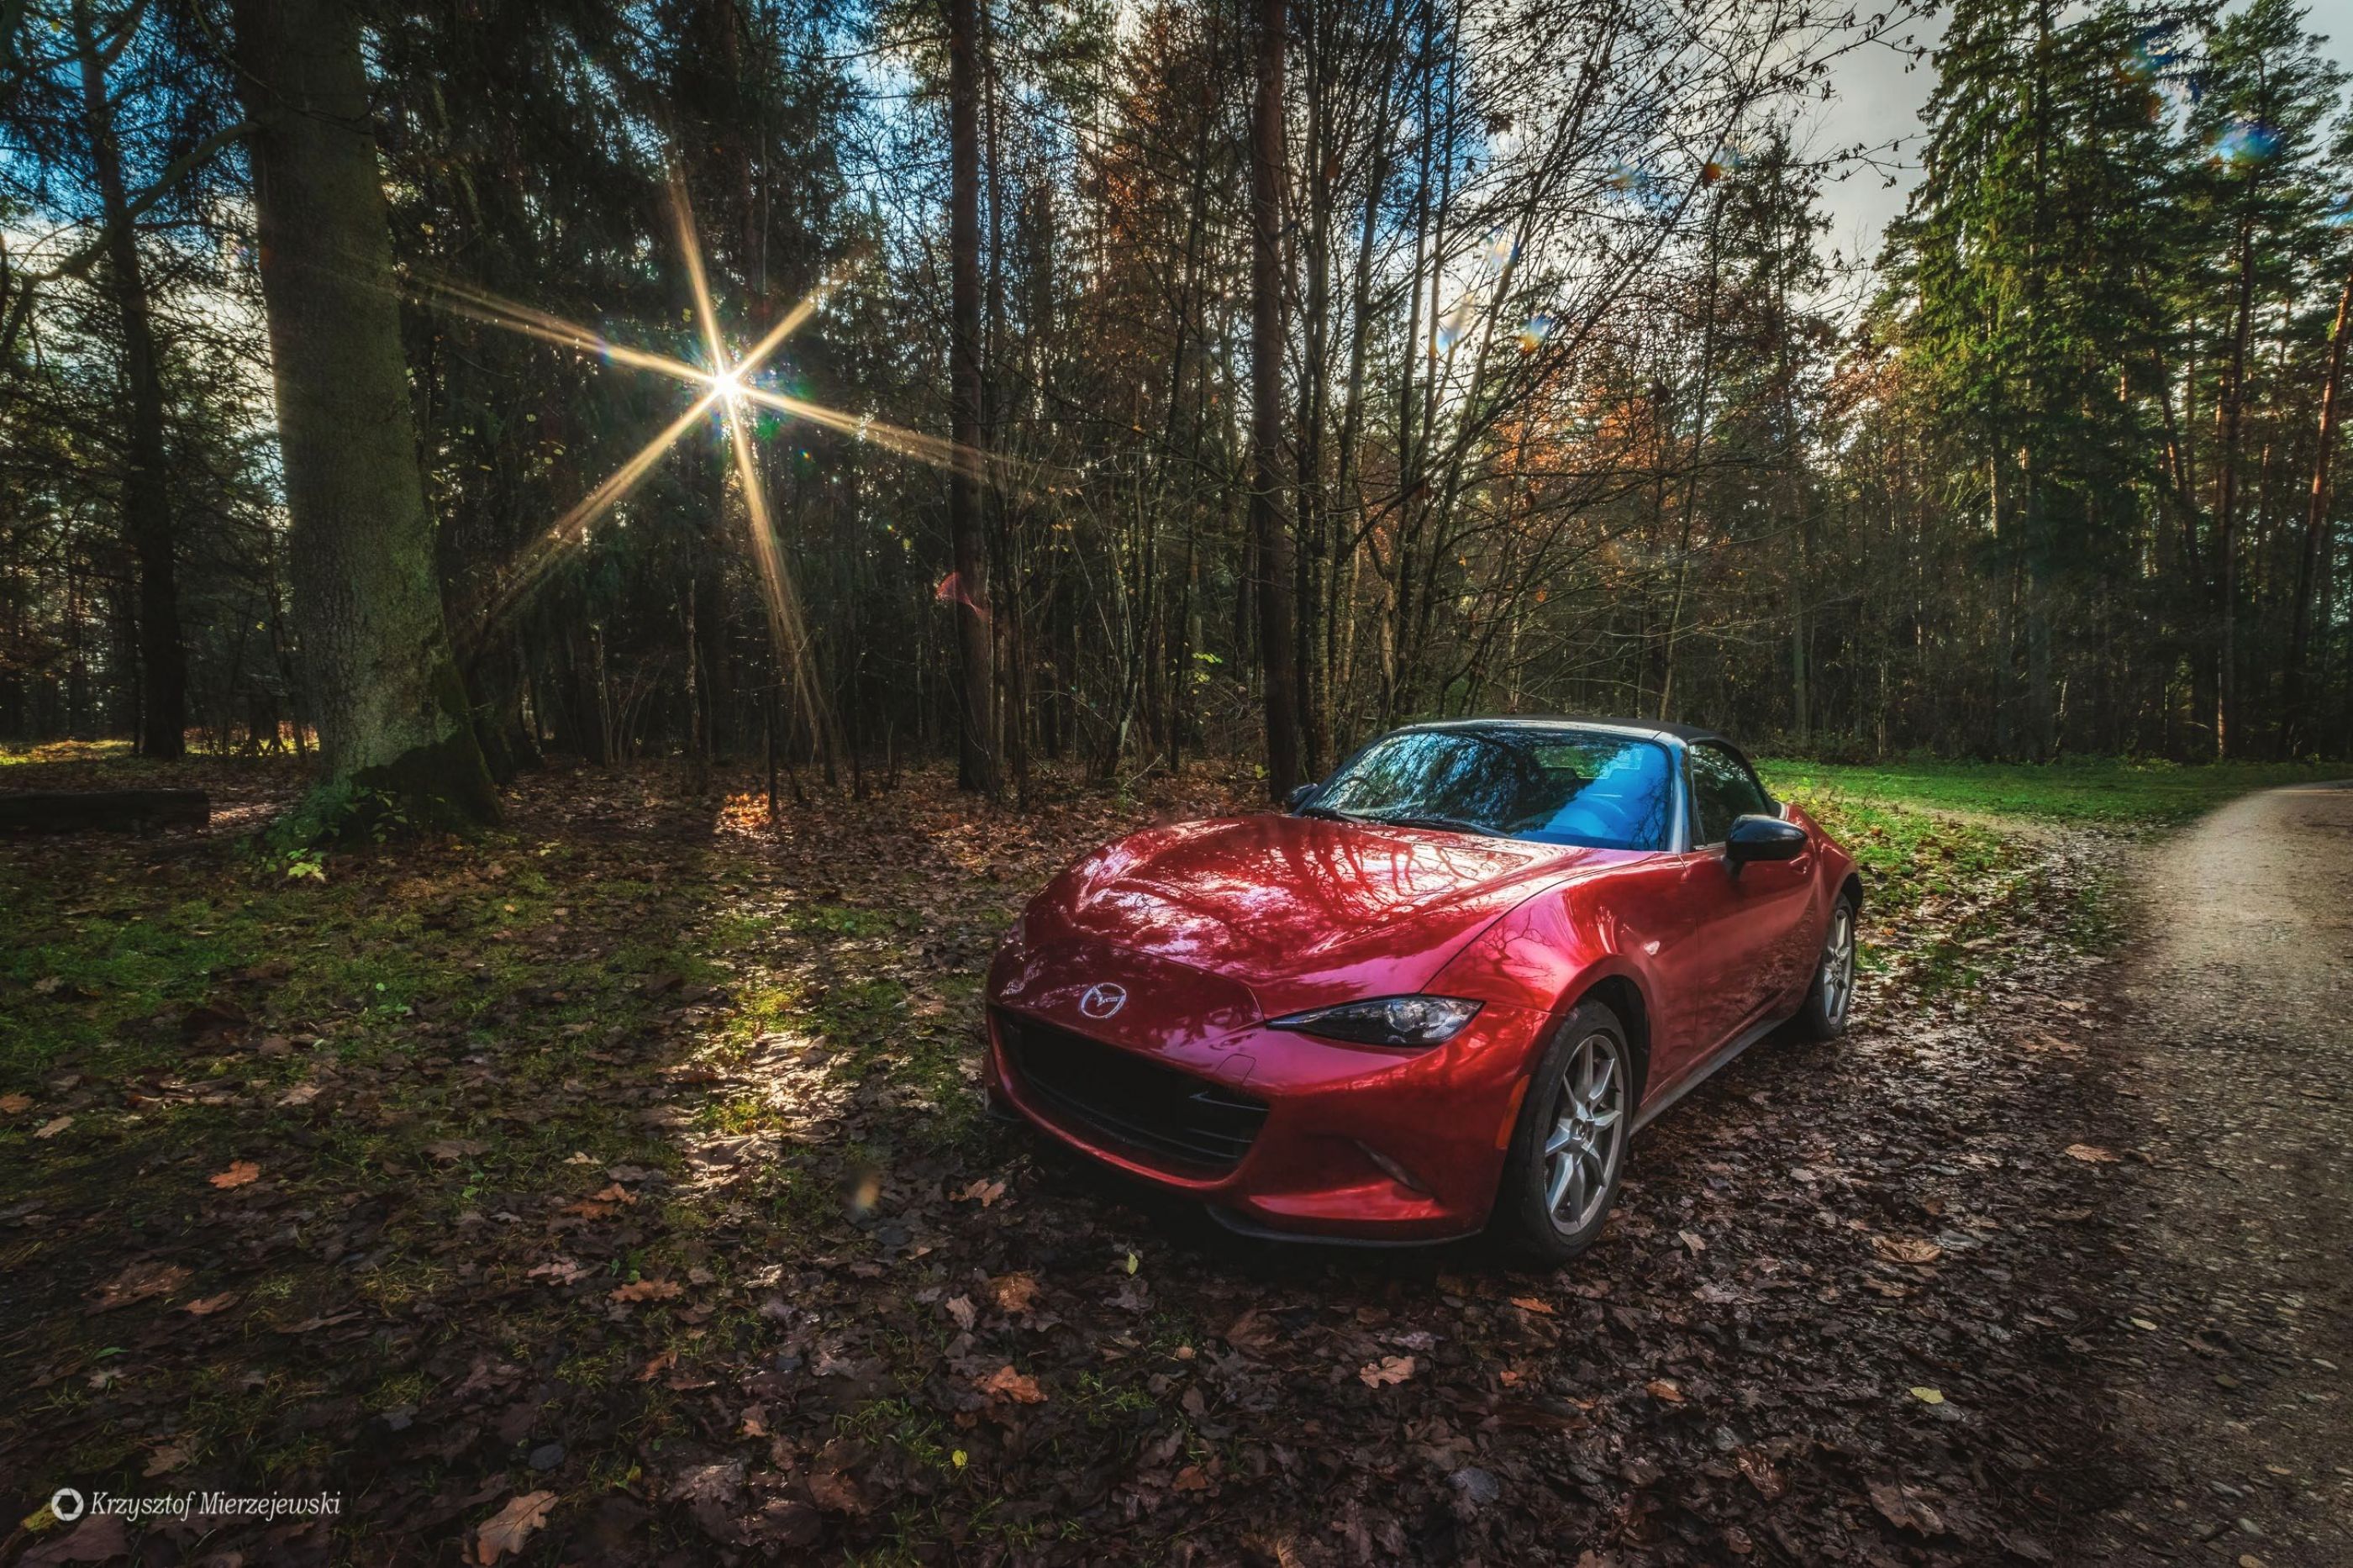 Car in the forest